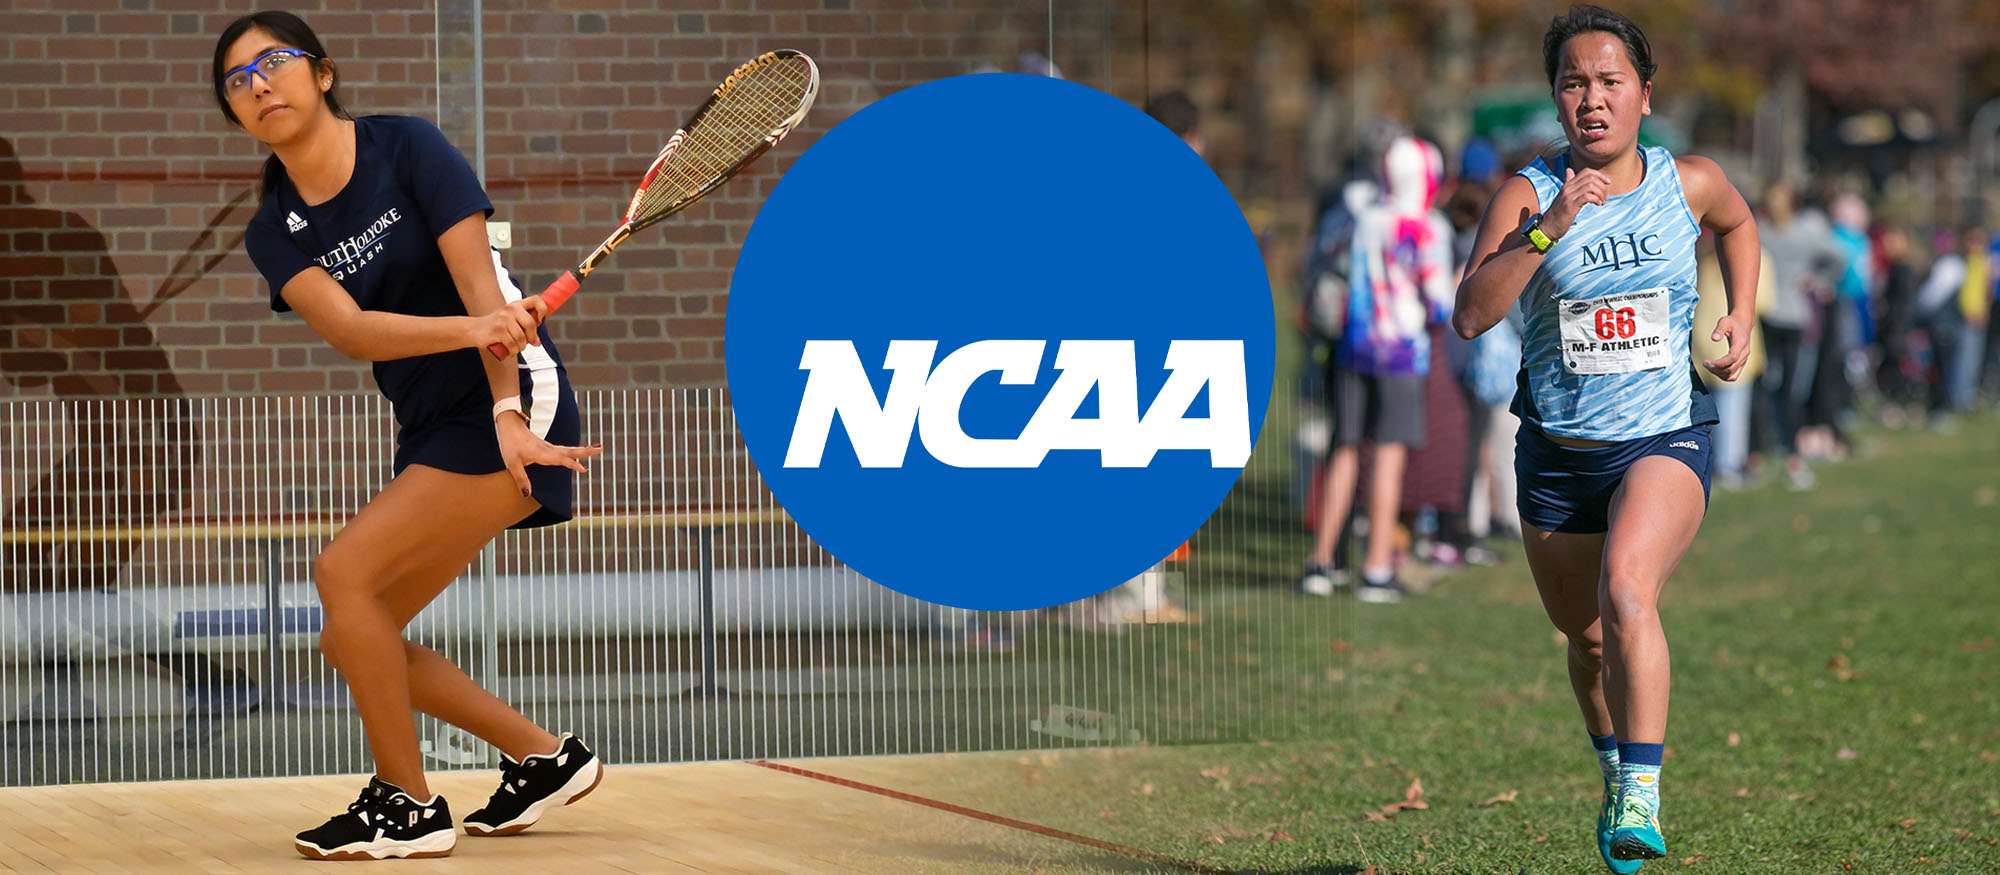 Lara Granados and Anderson Selected to Attend NCAA Division III Student Immersion Program